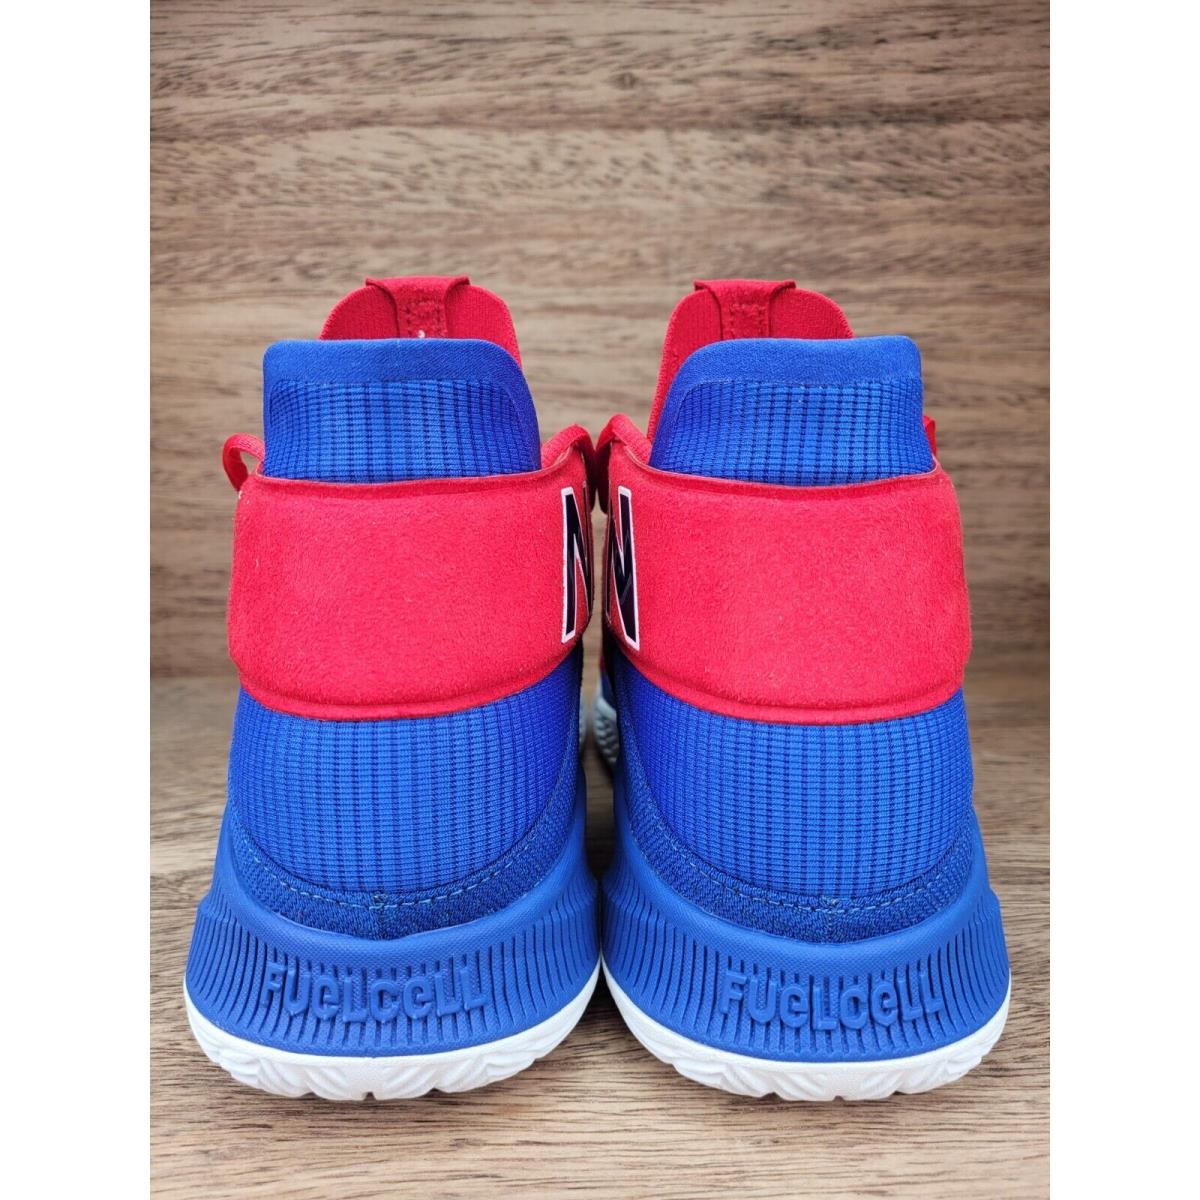 New Balance Men`s Kawhi Omn1s Clippers Basketball Shoes Red White Blue ...